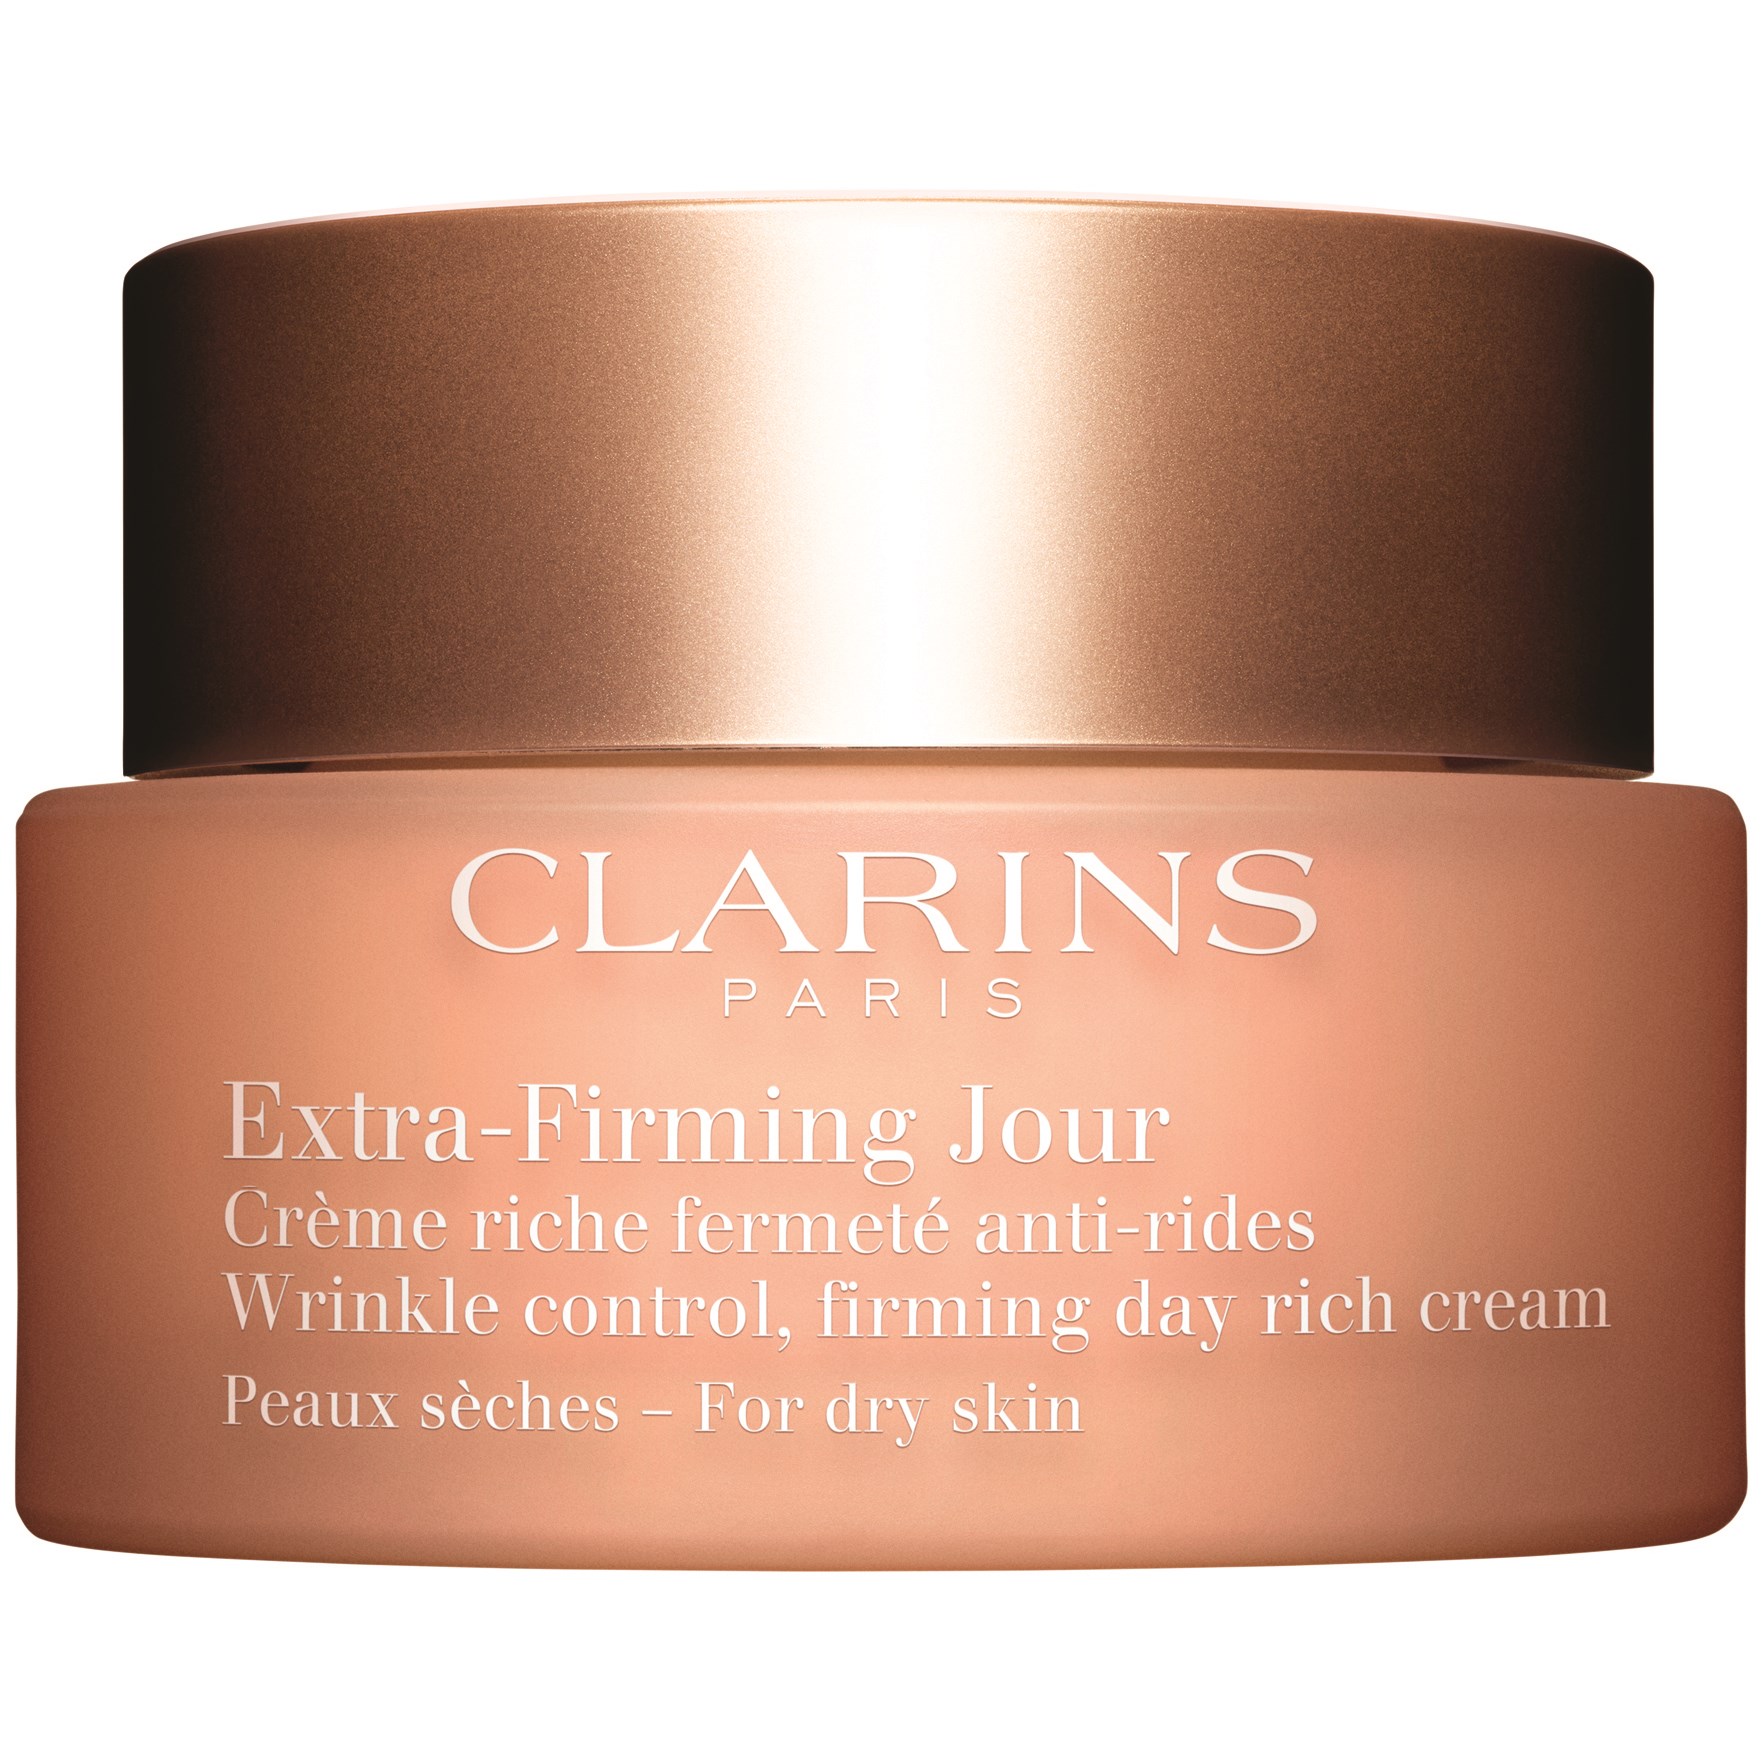 Clarins Extra-Firming Jour For dry skin 50 ml